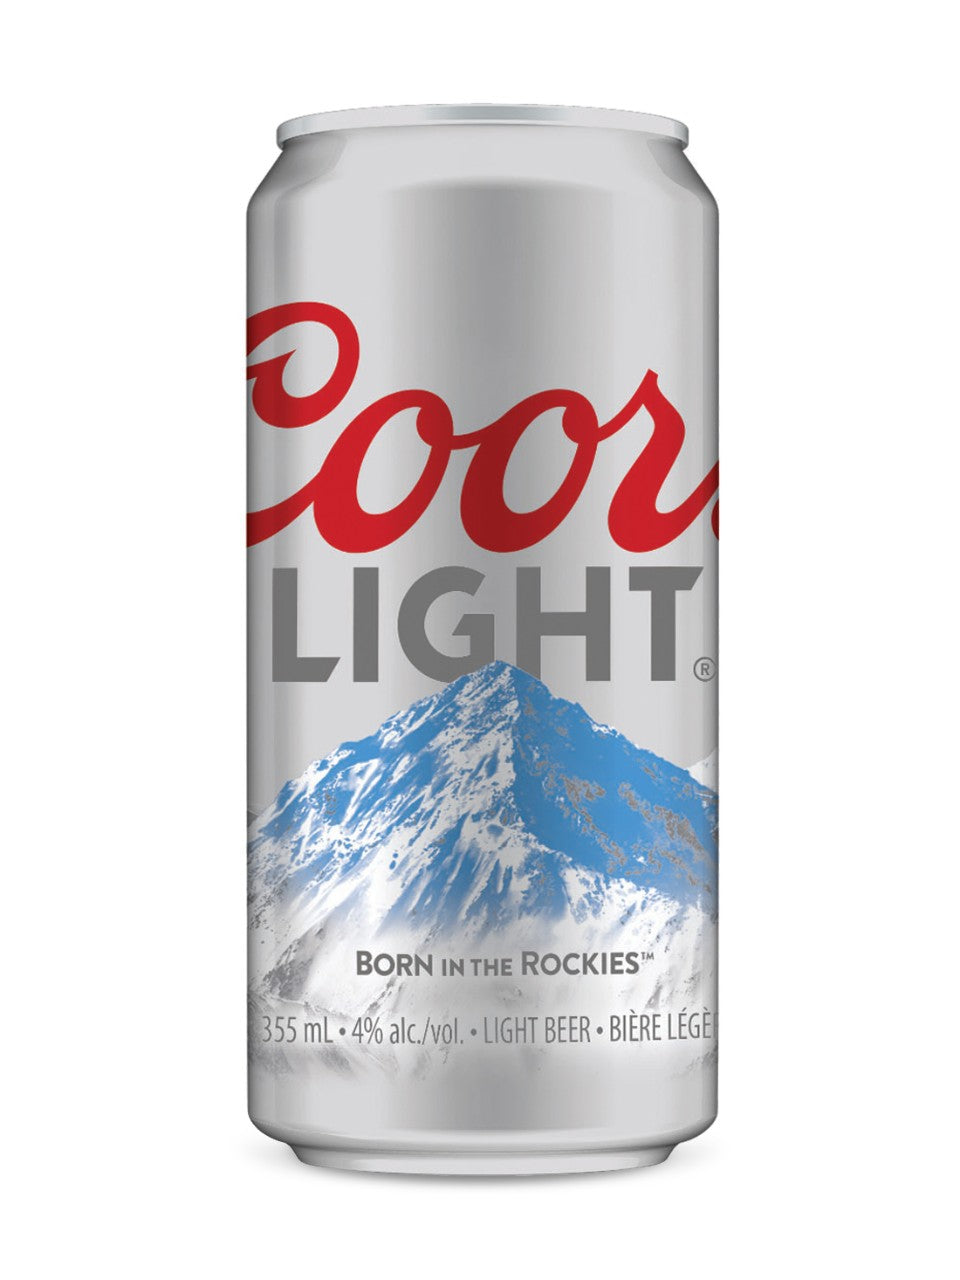 COORS LIGHT 355mL 6CANS